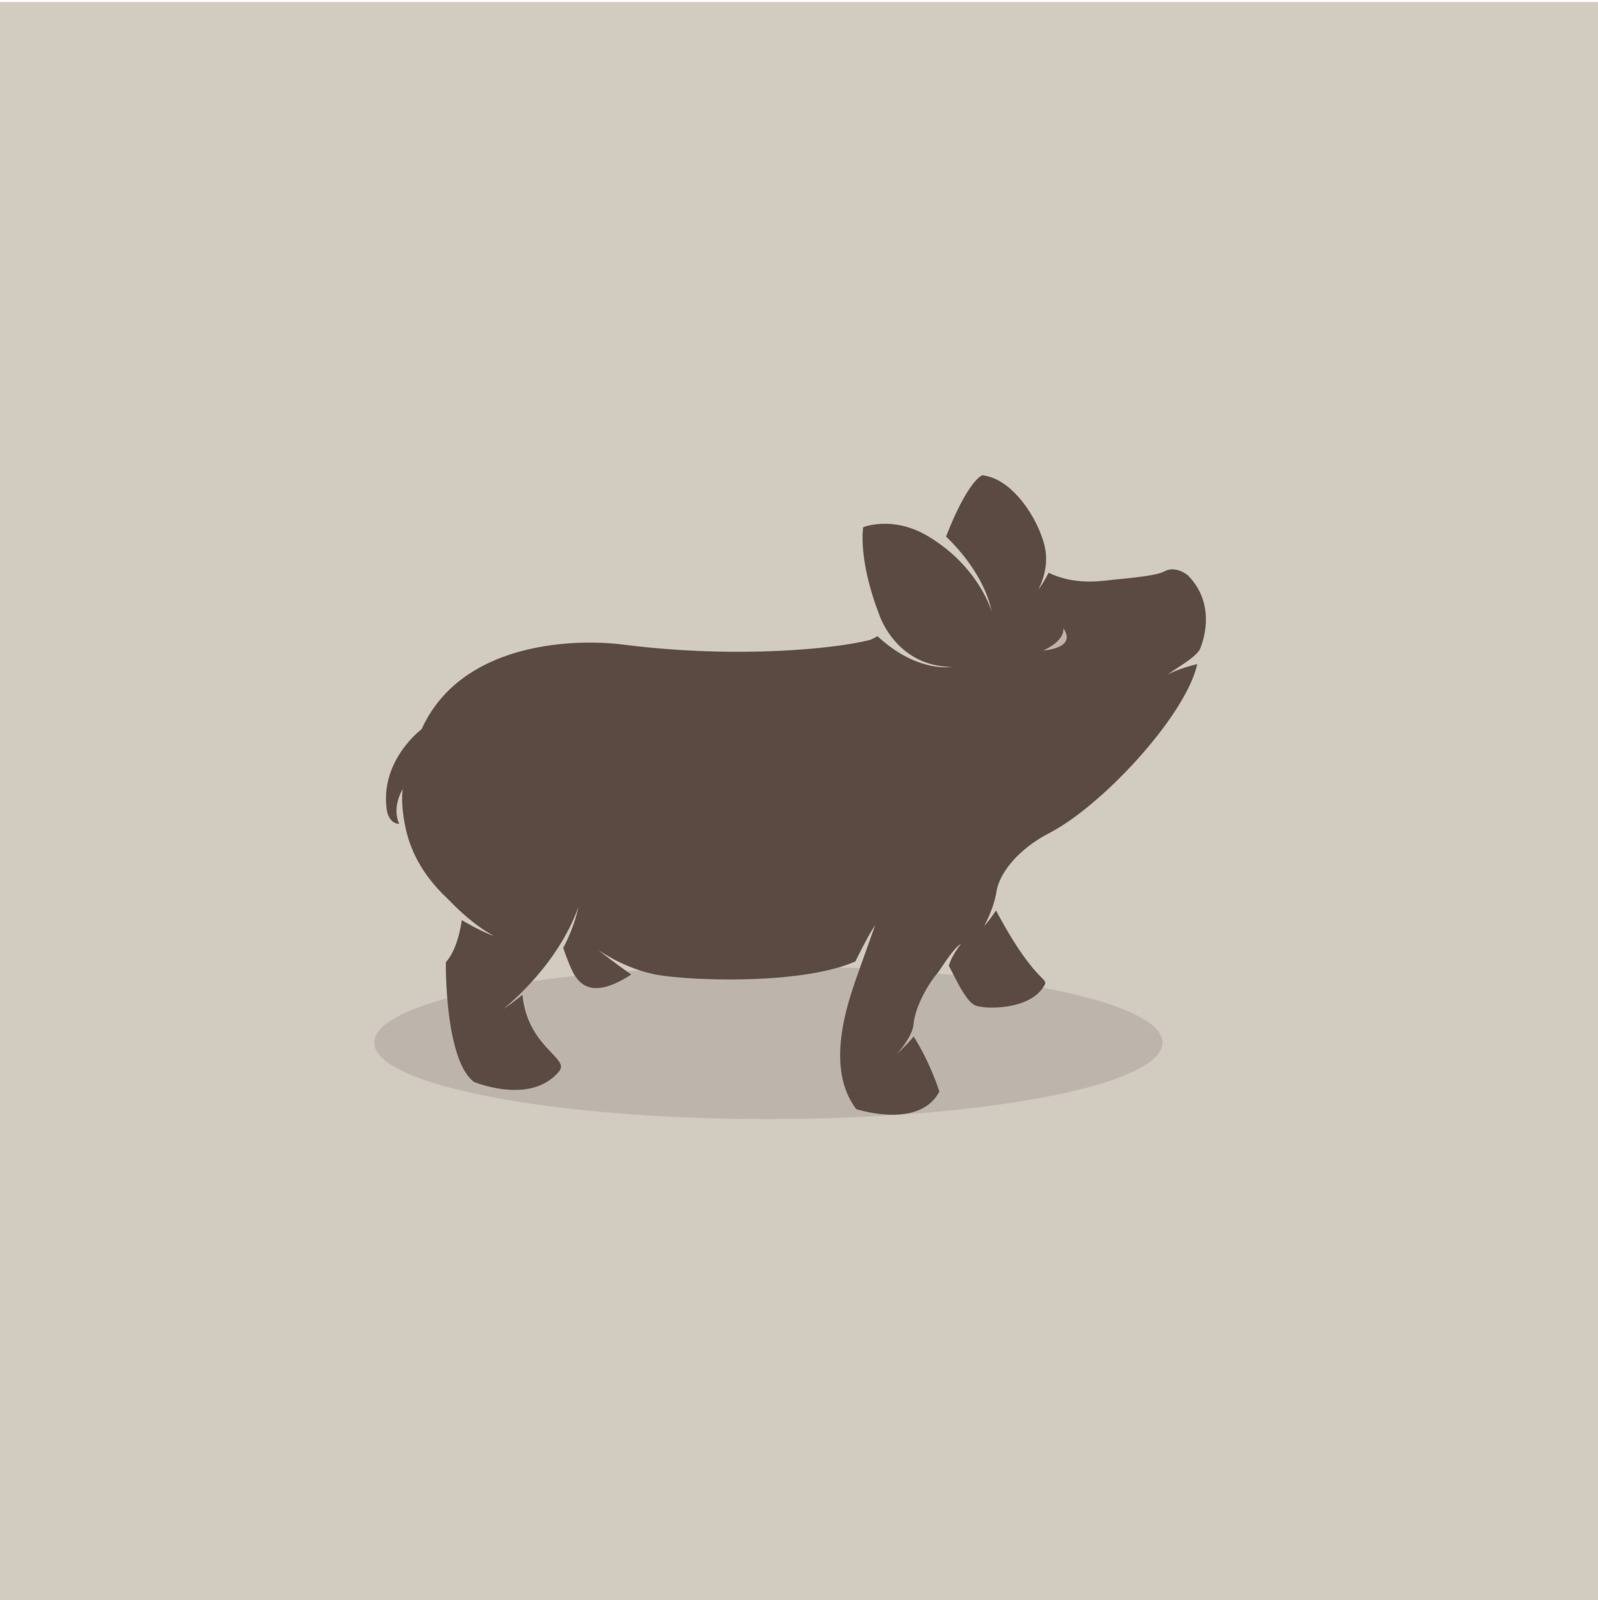 Vector image of an pig on brownish background